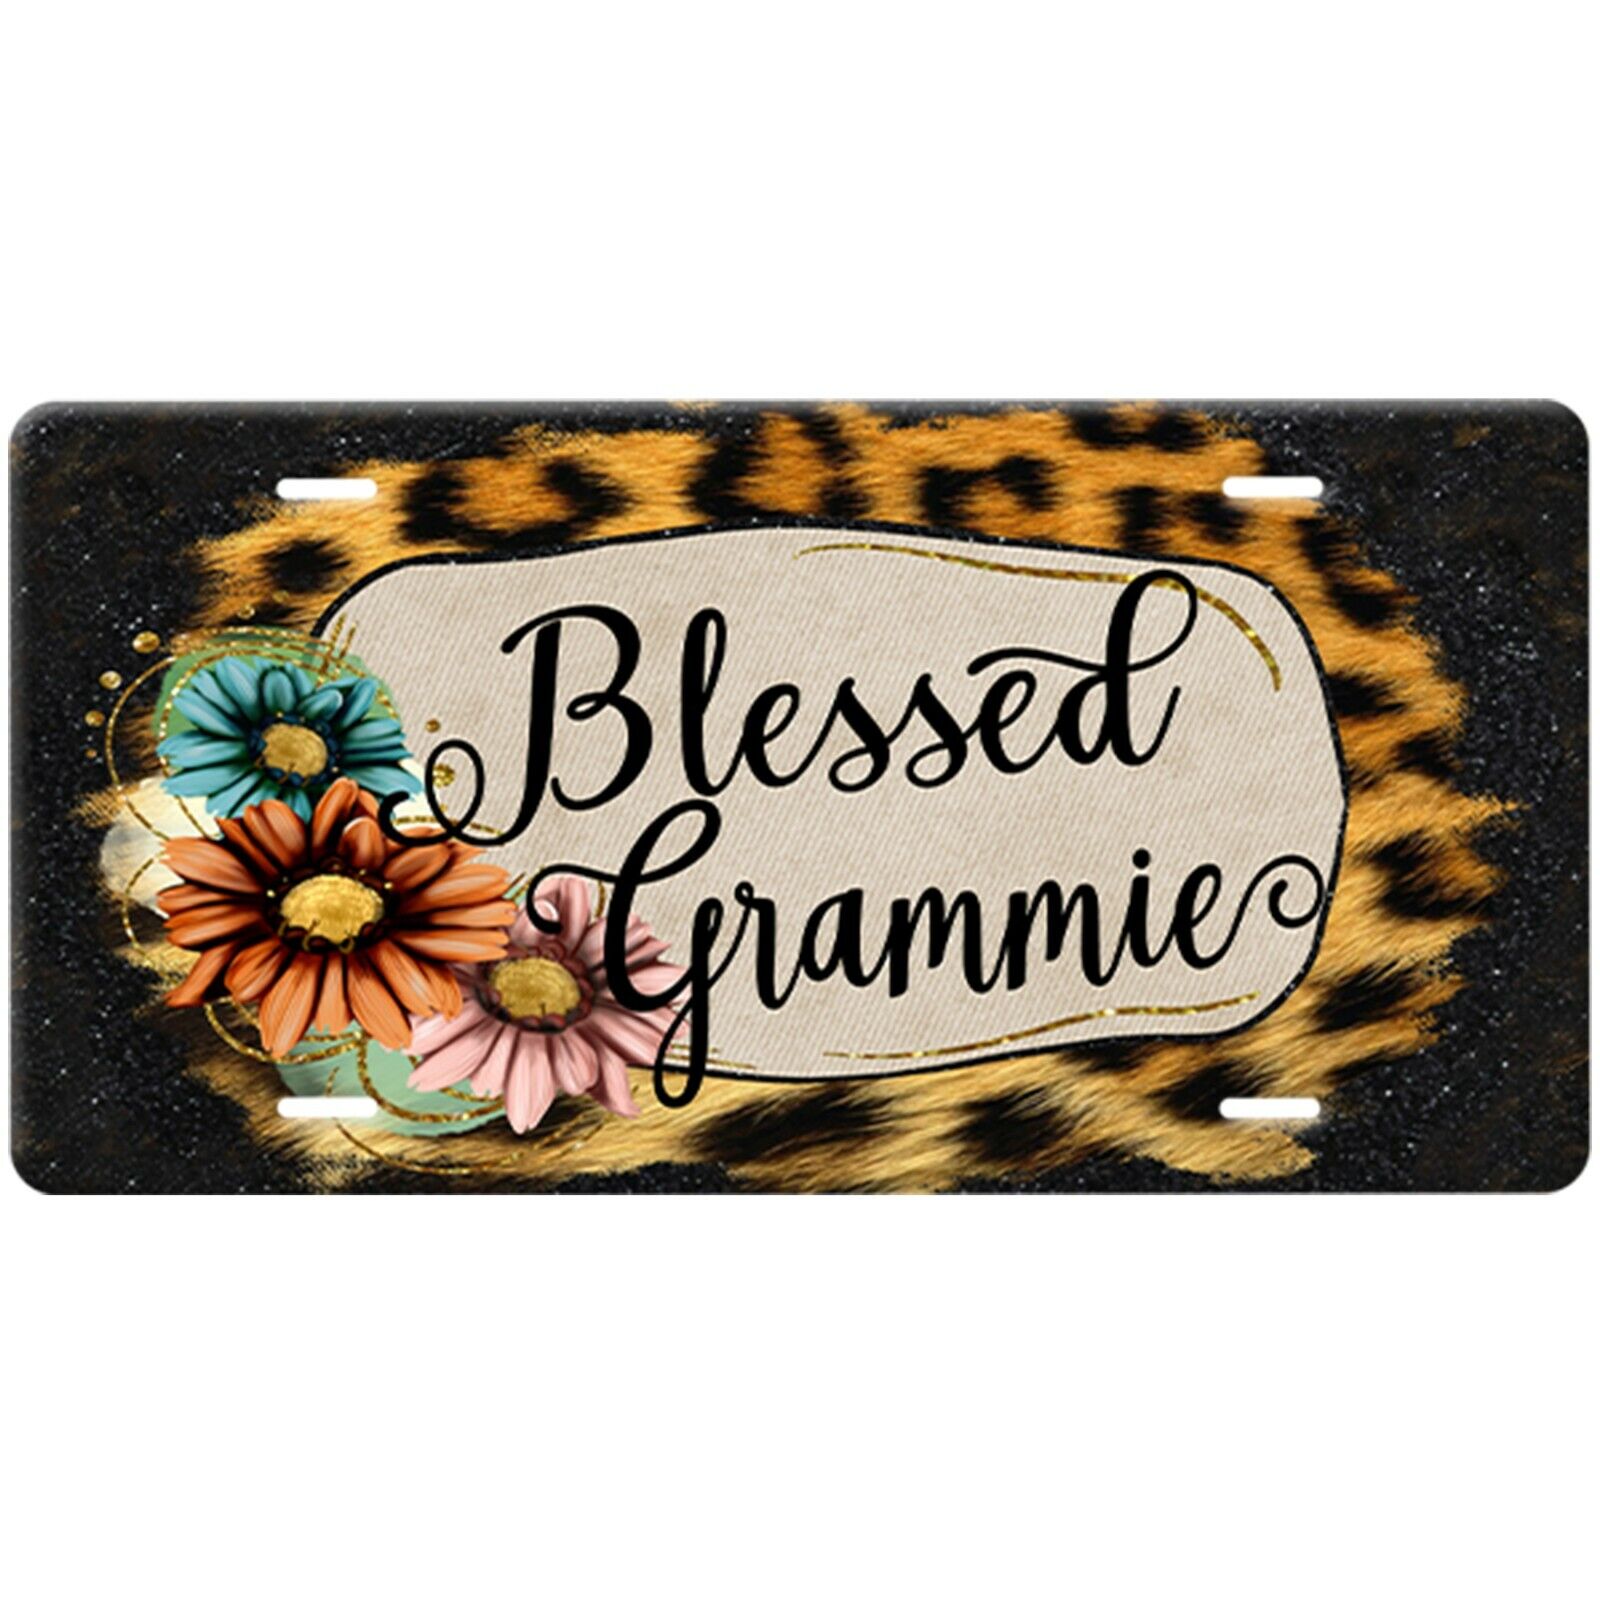 Blessed Grammie Grandmother Name License Plate-Leopard-Black Glitter-Flowers